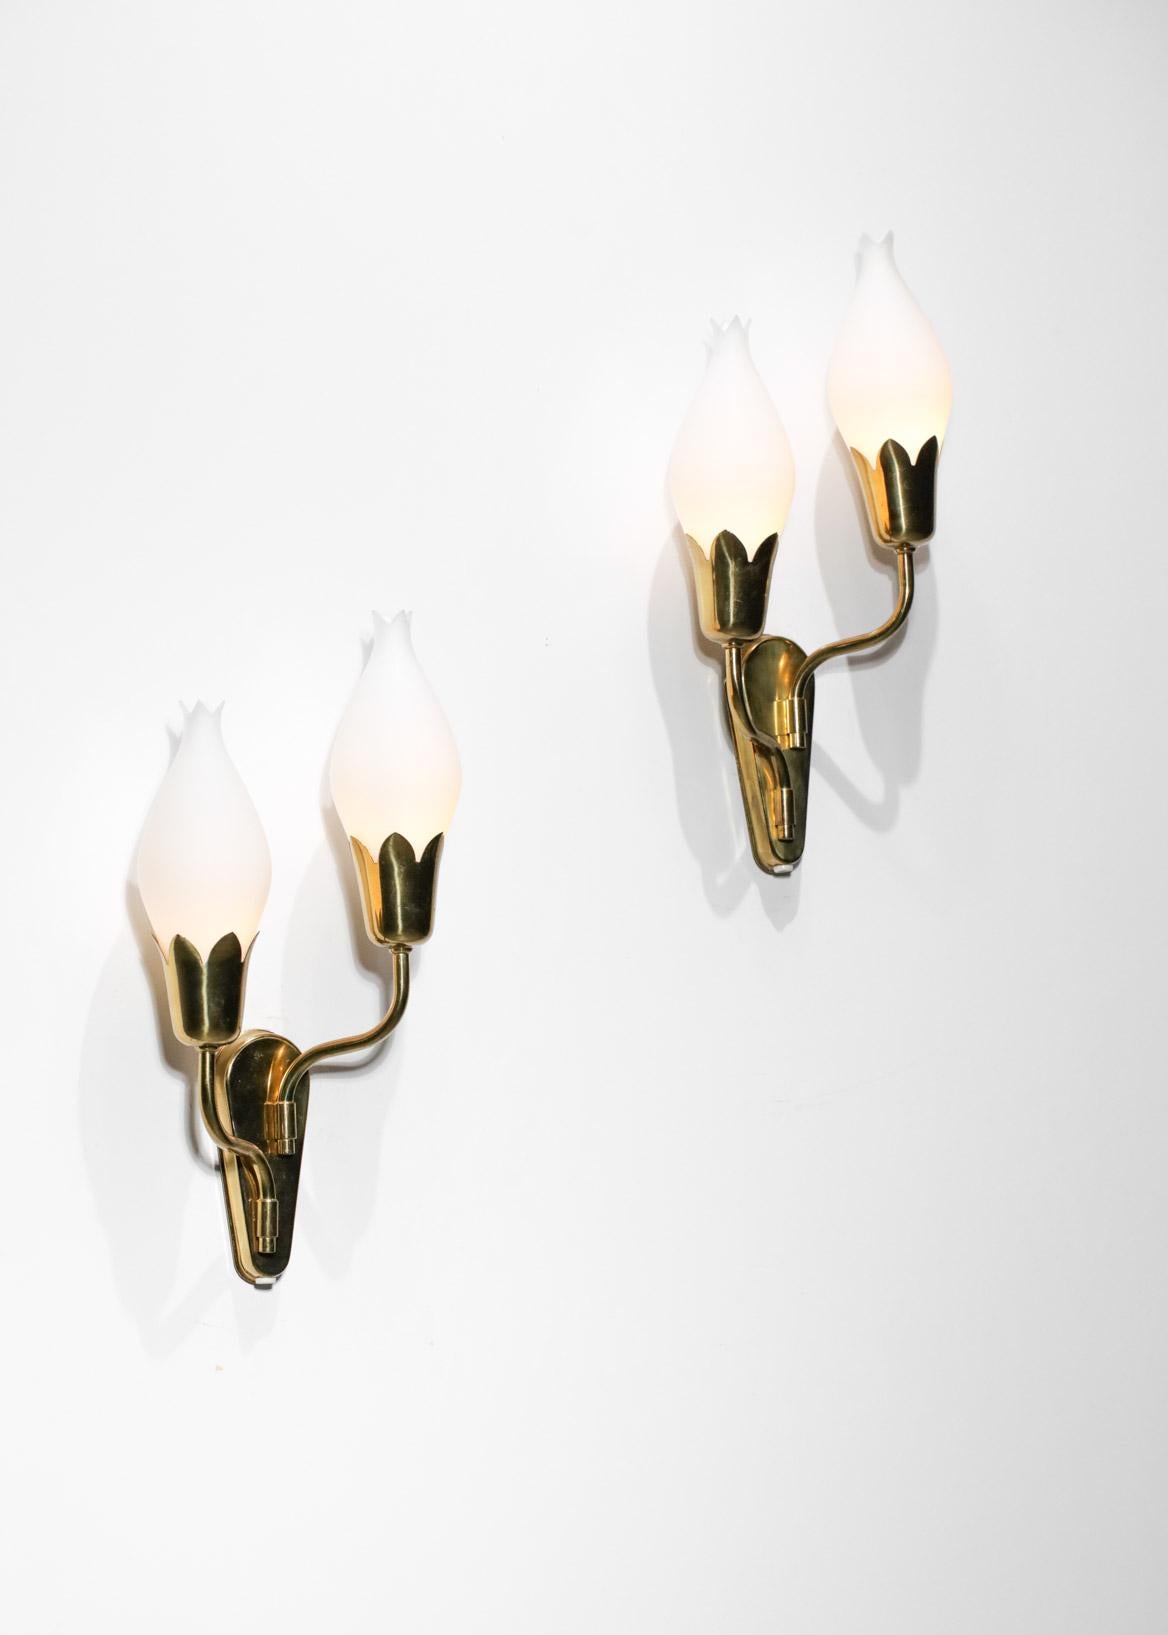 Pair of Tulip Sconces with Opaline and Brass from Fog & Morup Swedish Design 1